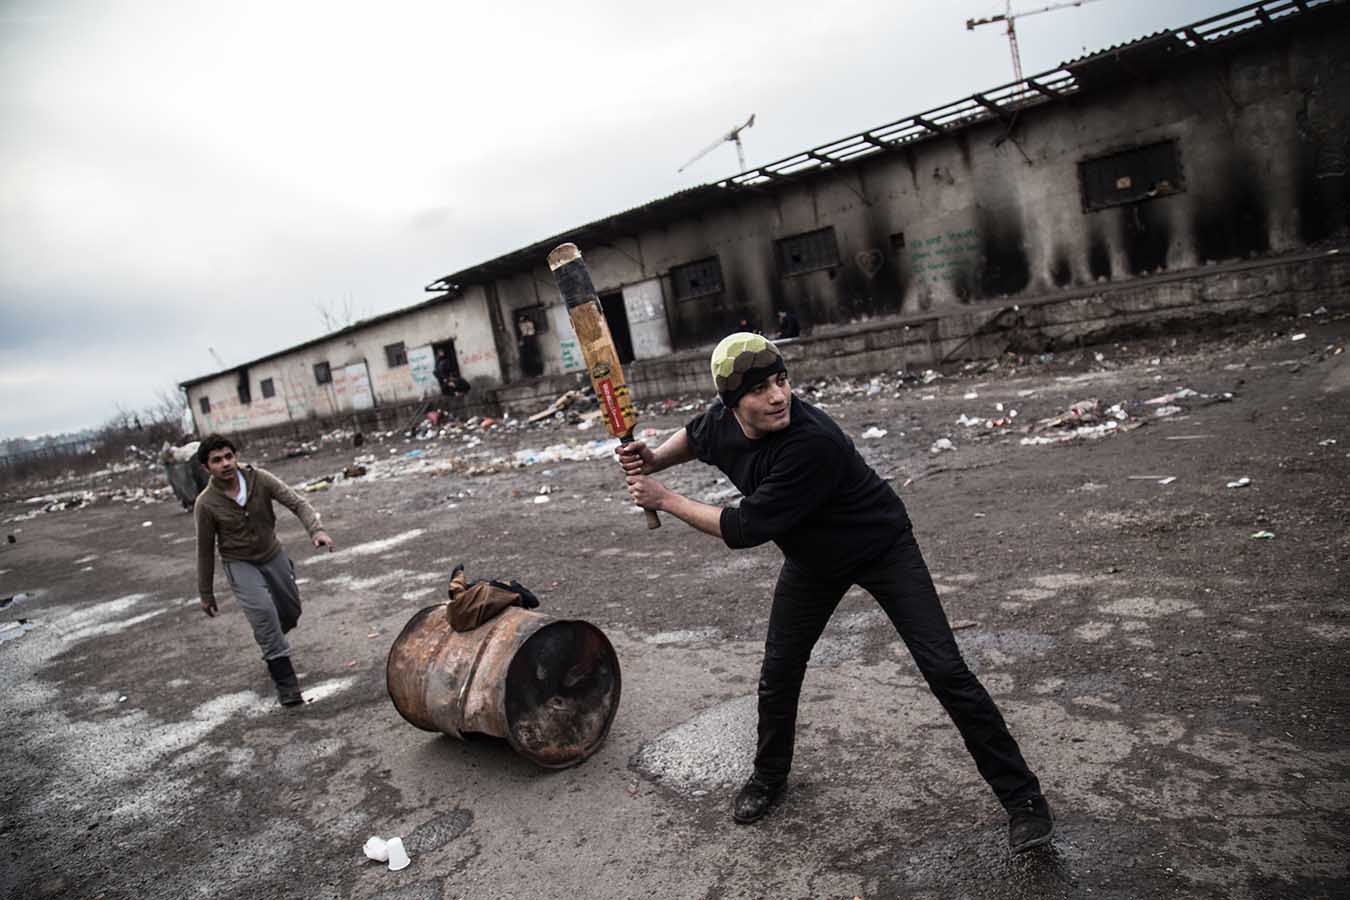  Refugees play cricket in one of the former loading bays of the "barracks", once an industrial complex, now a makeshift camp, in Beblgrade, Serbia, where almost 1,300 refugees are sleeping rough. 
 